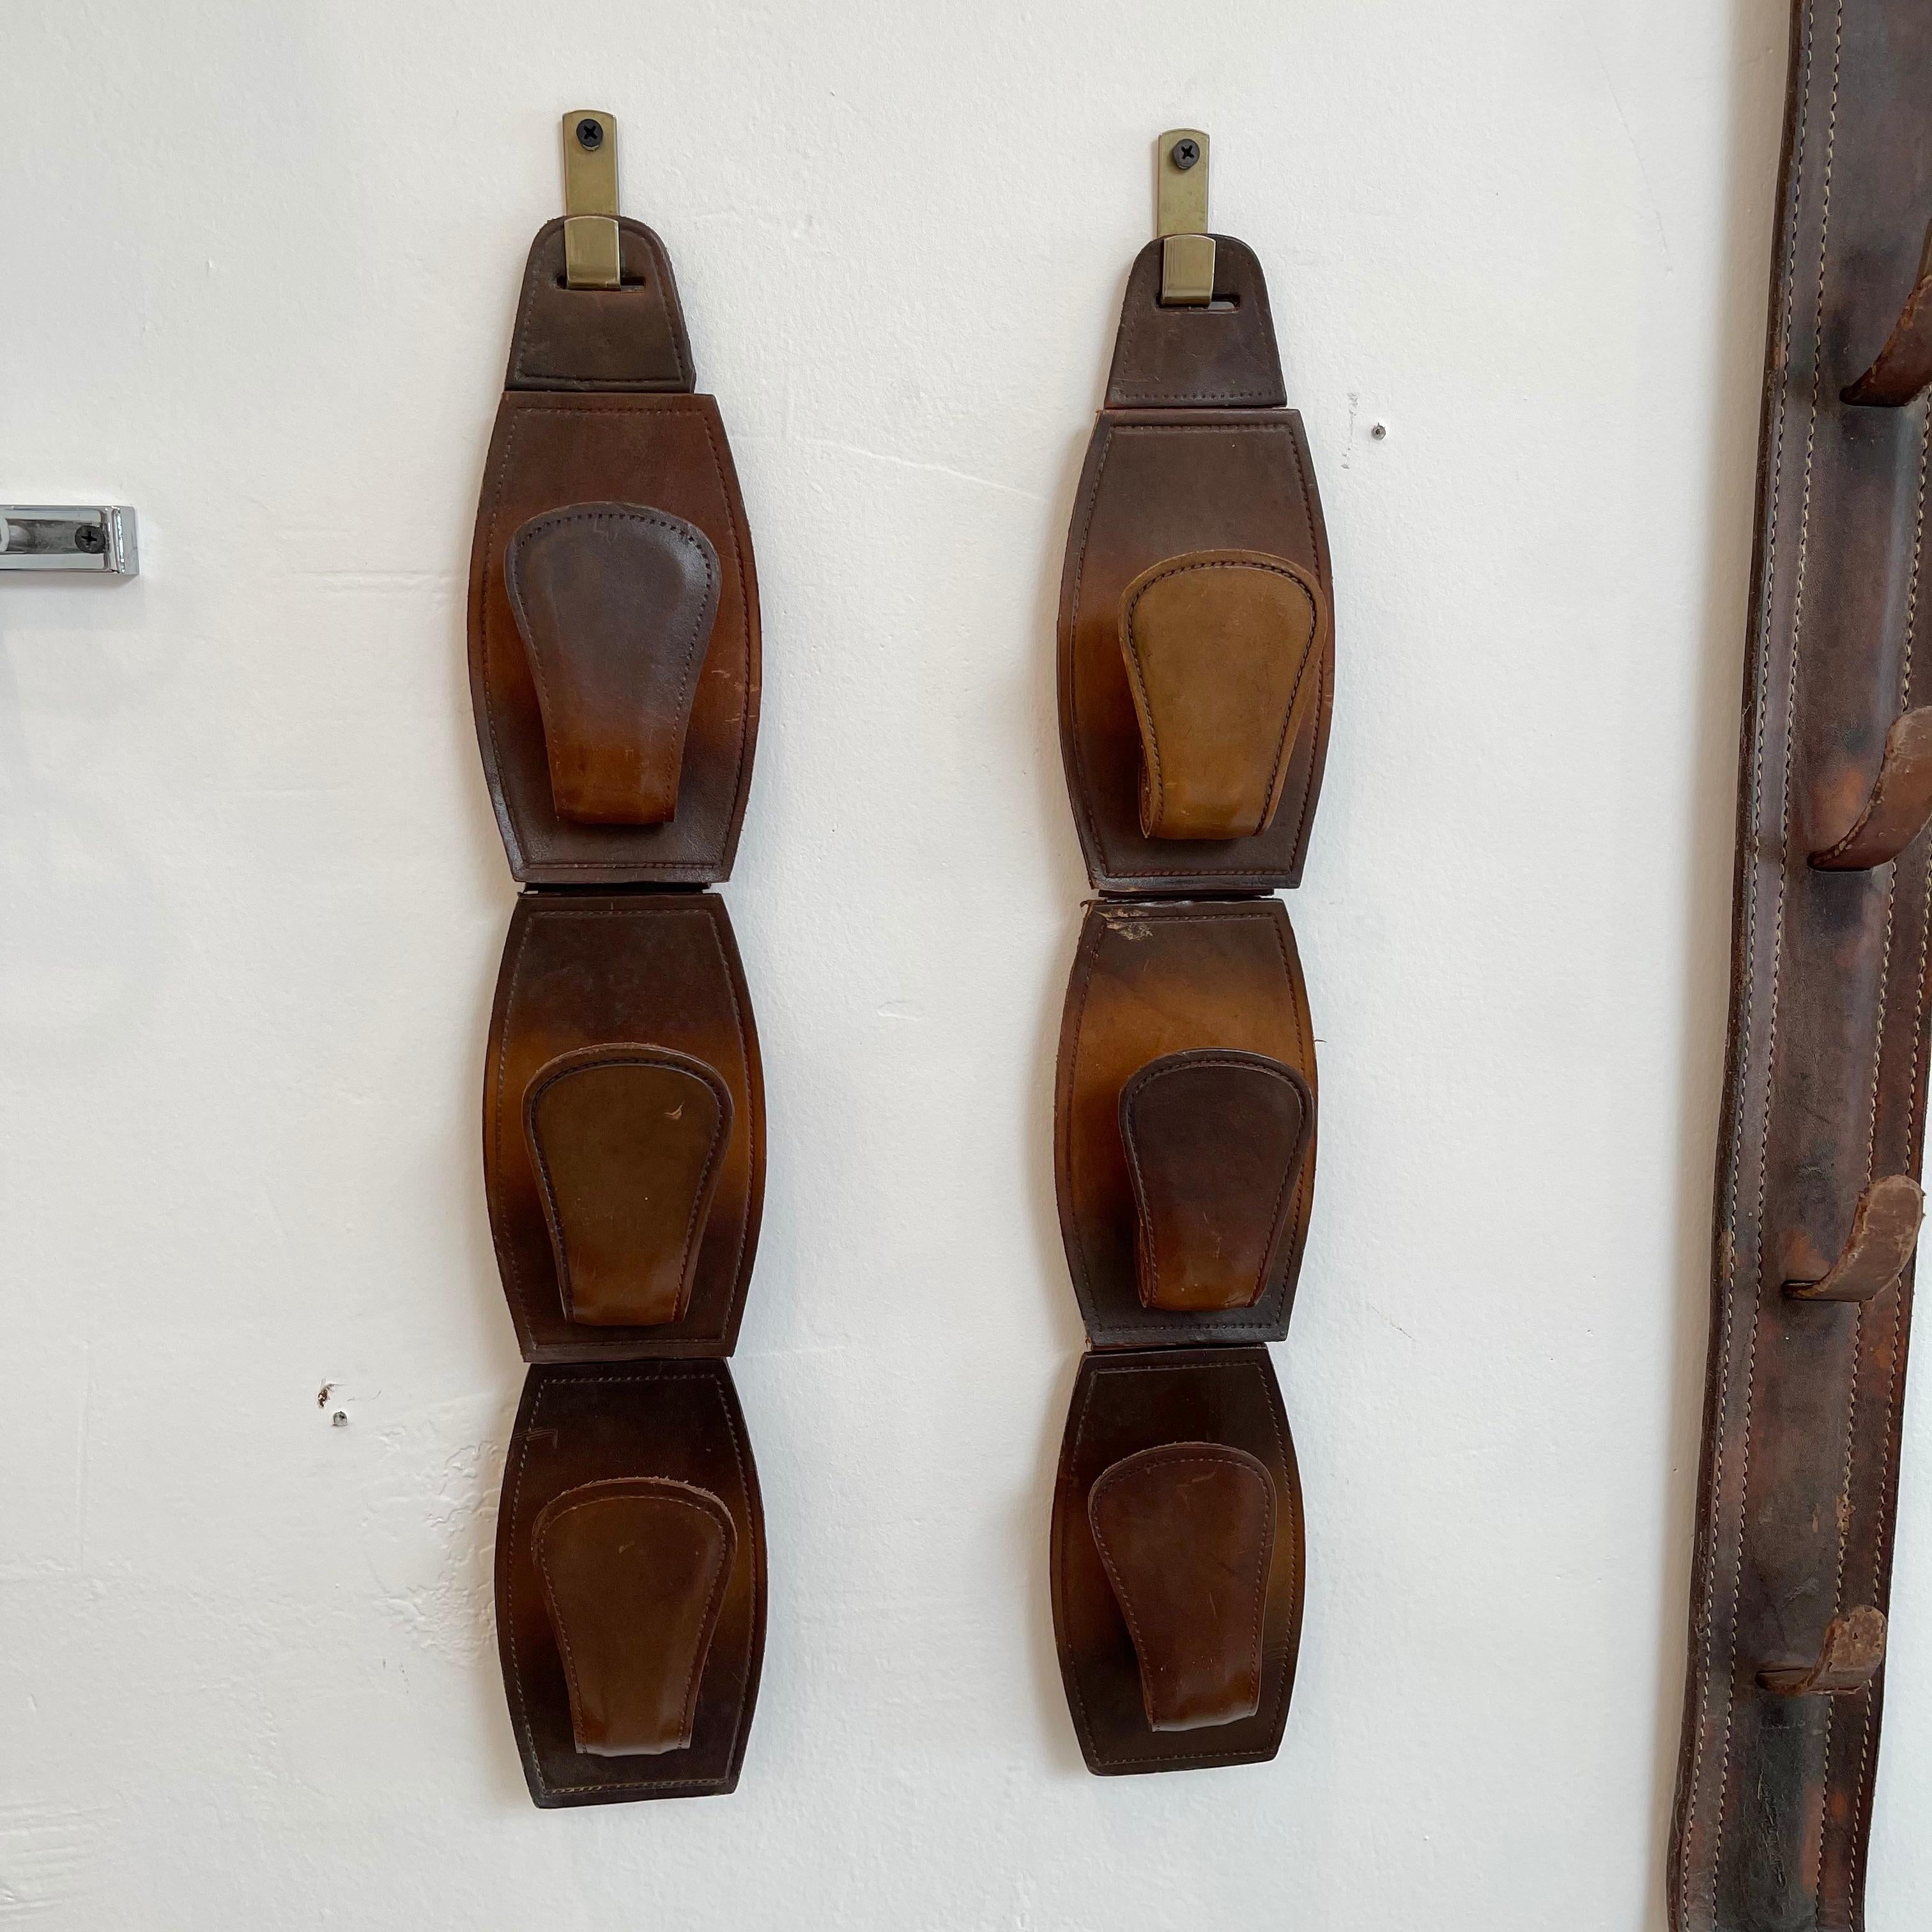 Great pair of French saddle leather hooks in the style of Jacques Adnet. Brass wall hook with leather hooks hanging from bracket. Each set has three individual hooks that are joined on the backside. Beautiful saddle leather with rich patina. Hooks